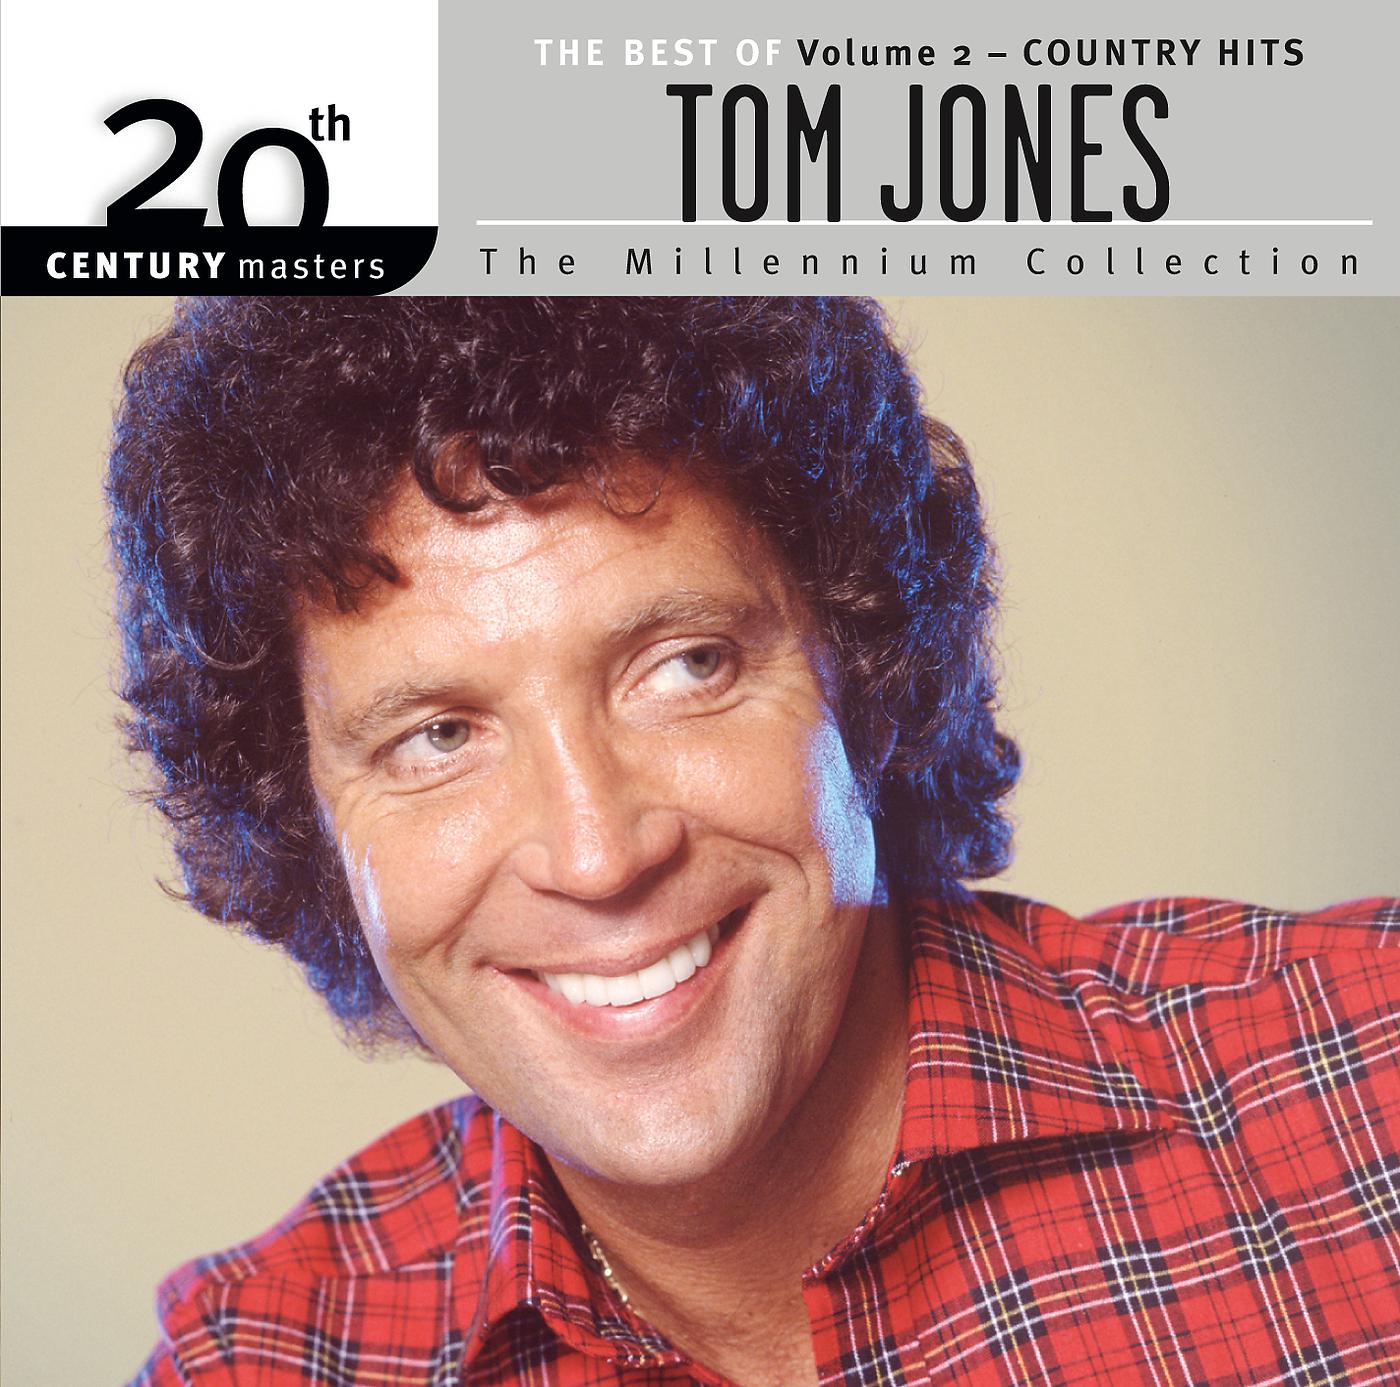 Постер альбома The Best Of Tom Jones Country Hits 20th Century Masters The Millennium Collection